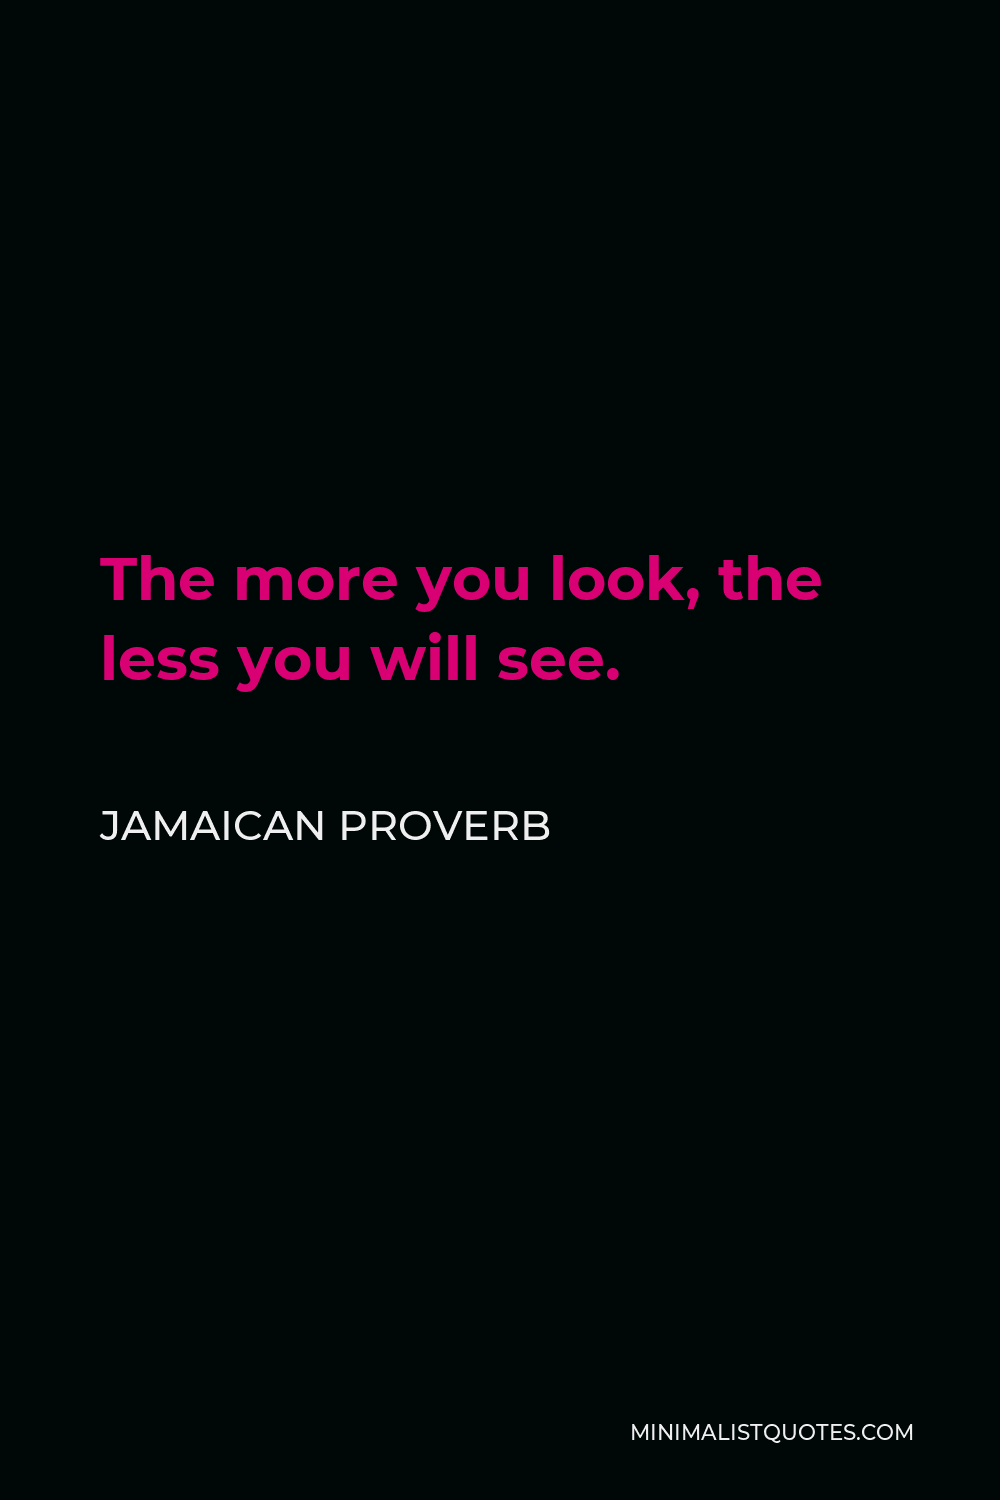 Jamaican Proverb Quote - The more you look, the less you will see.